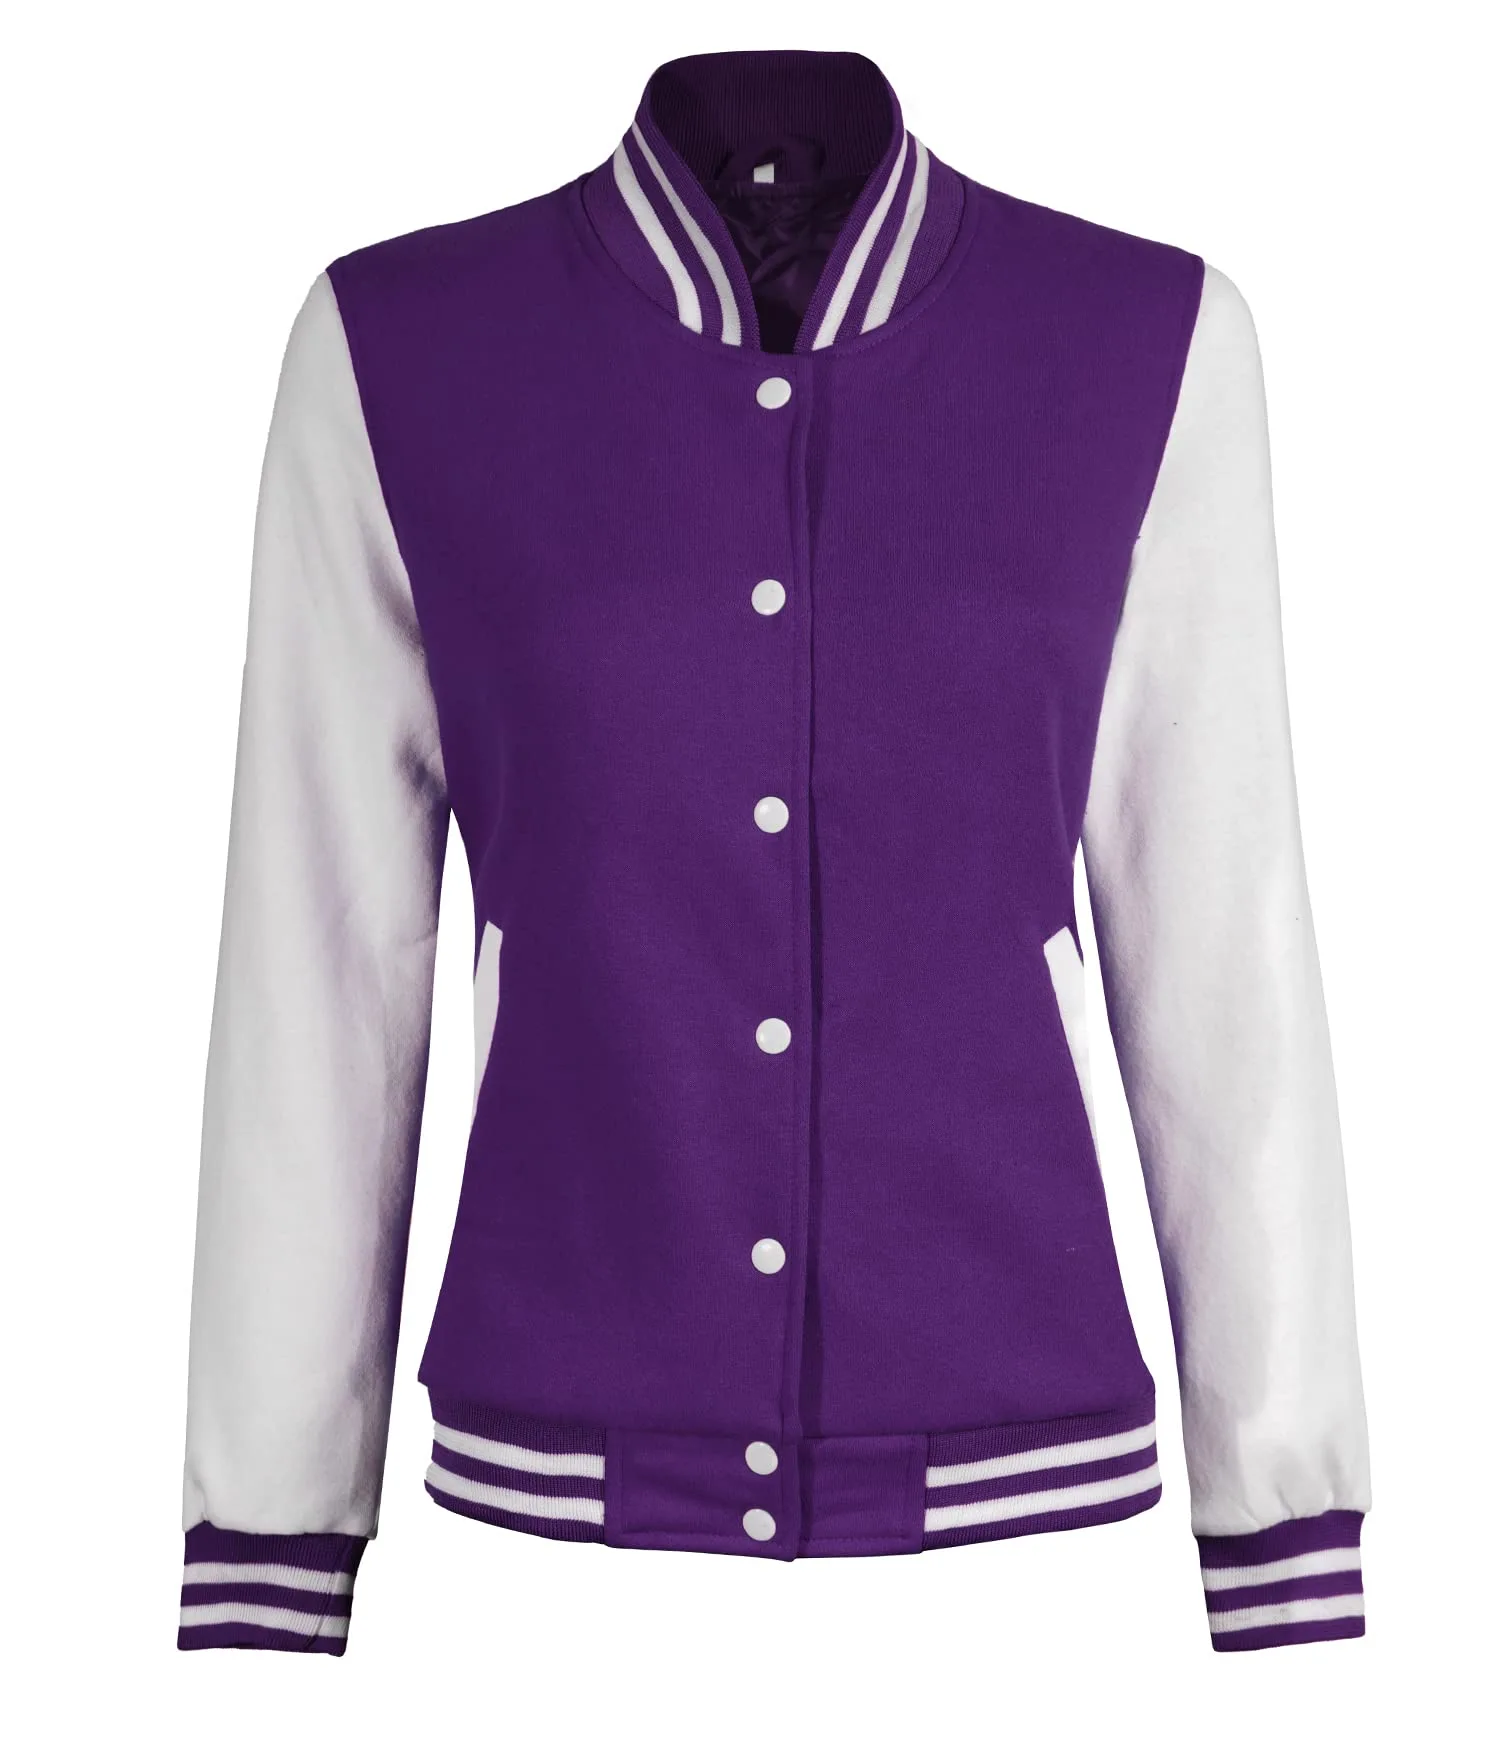 purple-white-quilted-bomber-varsity-jacket-for-womens